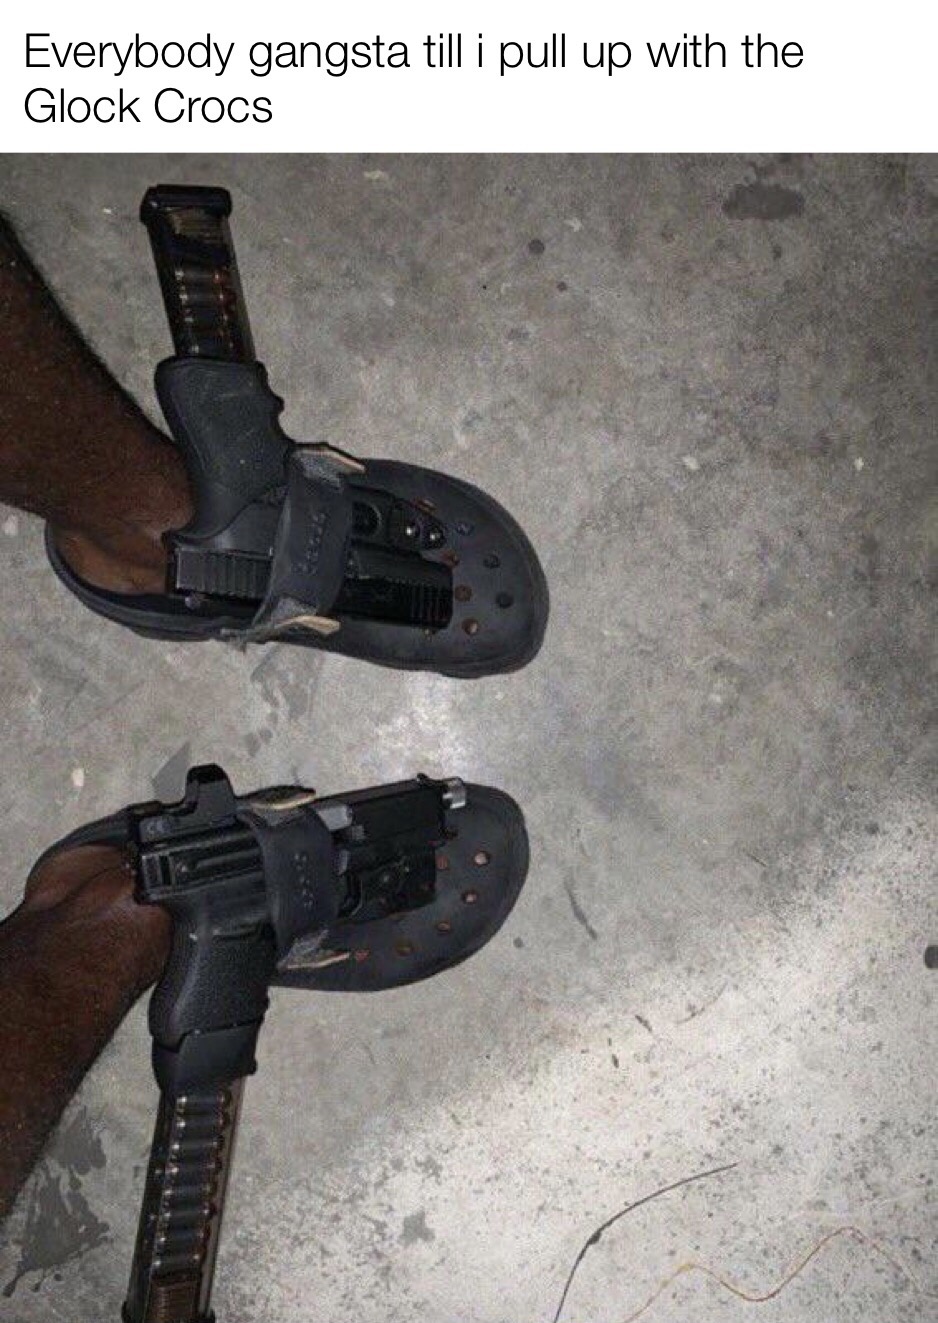 crocs with glock - Everybody gangsta till i pull up with the Glock Crocs